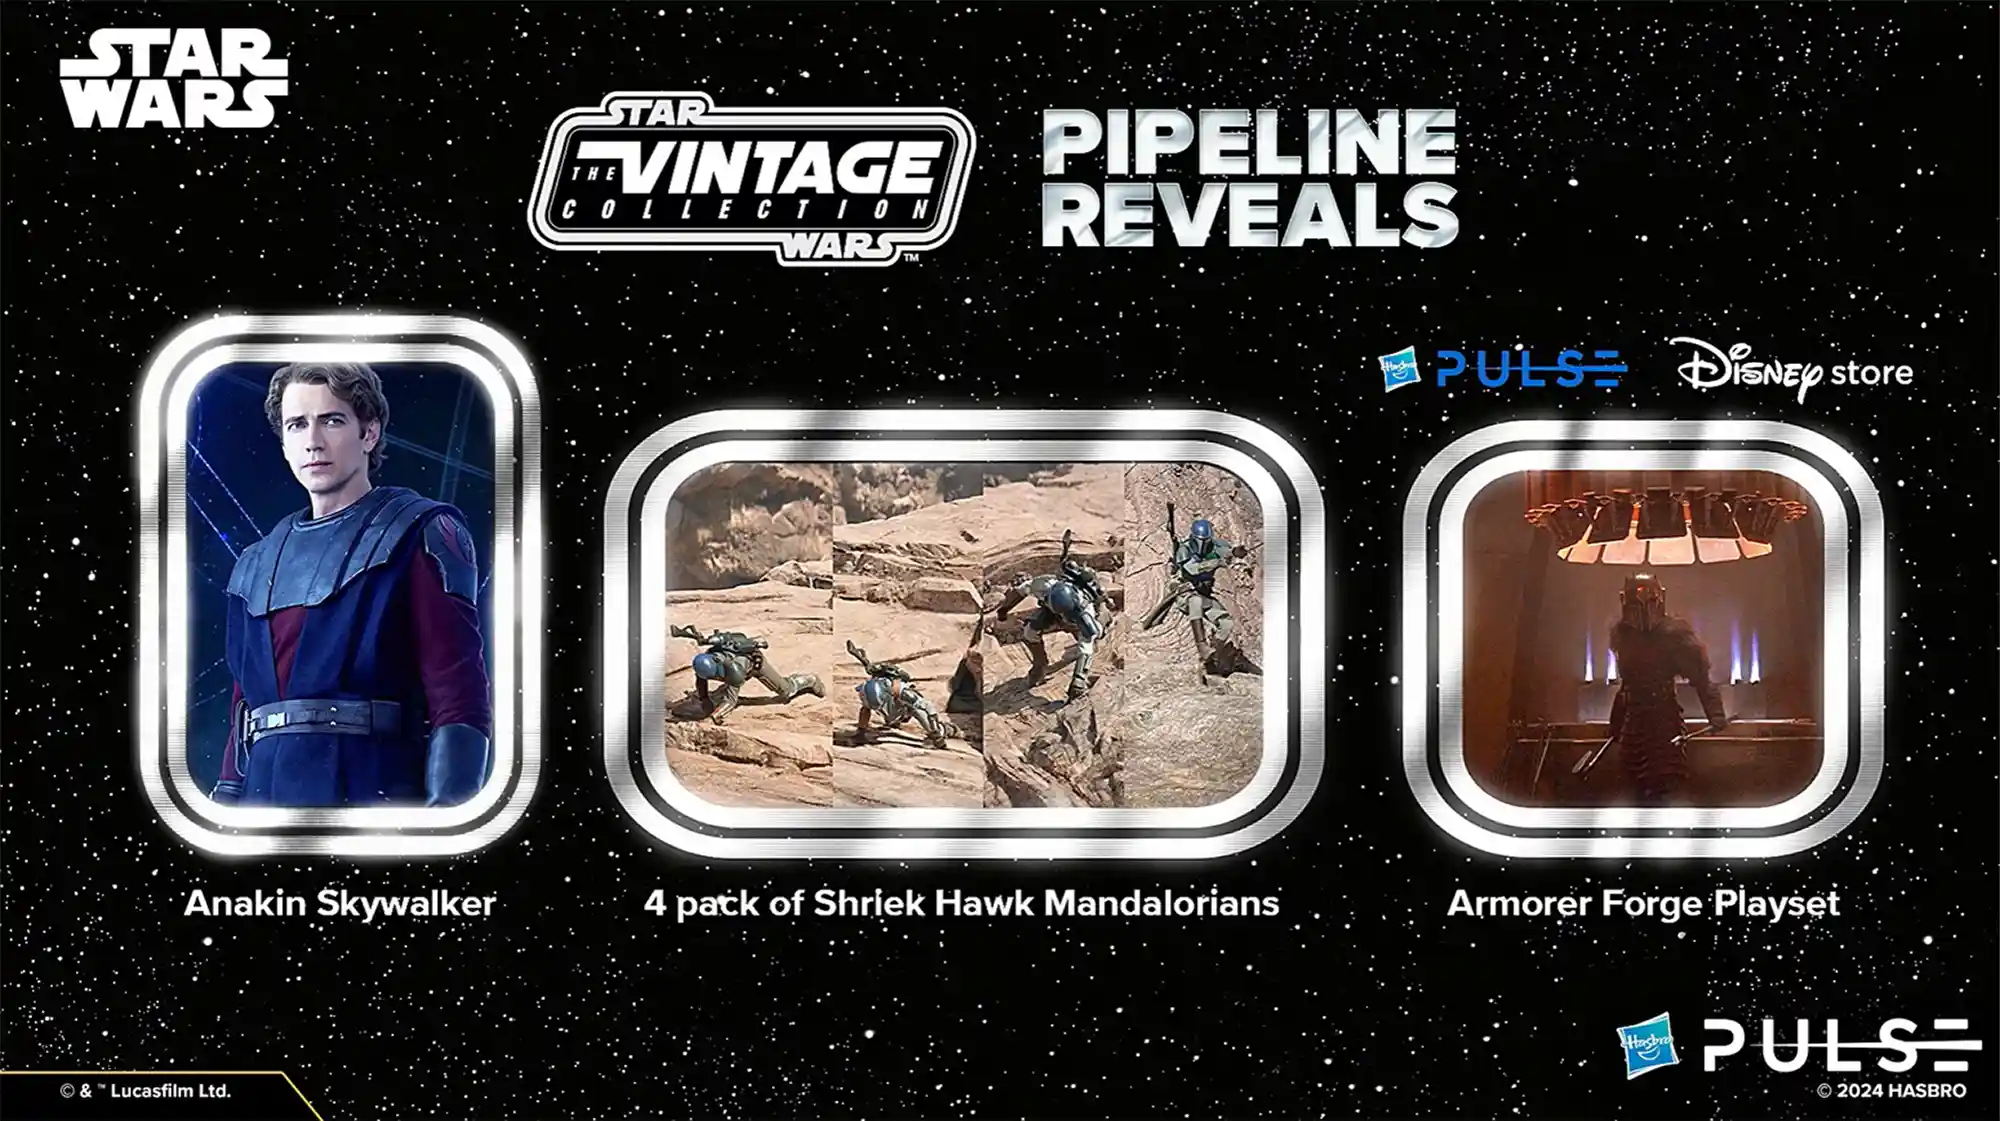 The Vintage Collection Pipeline reveals